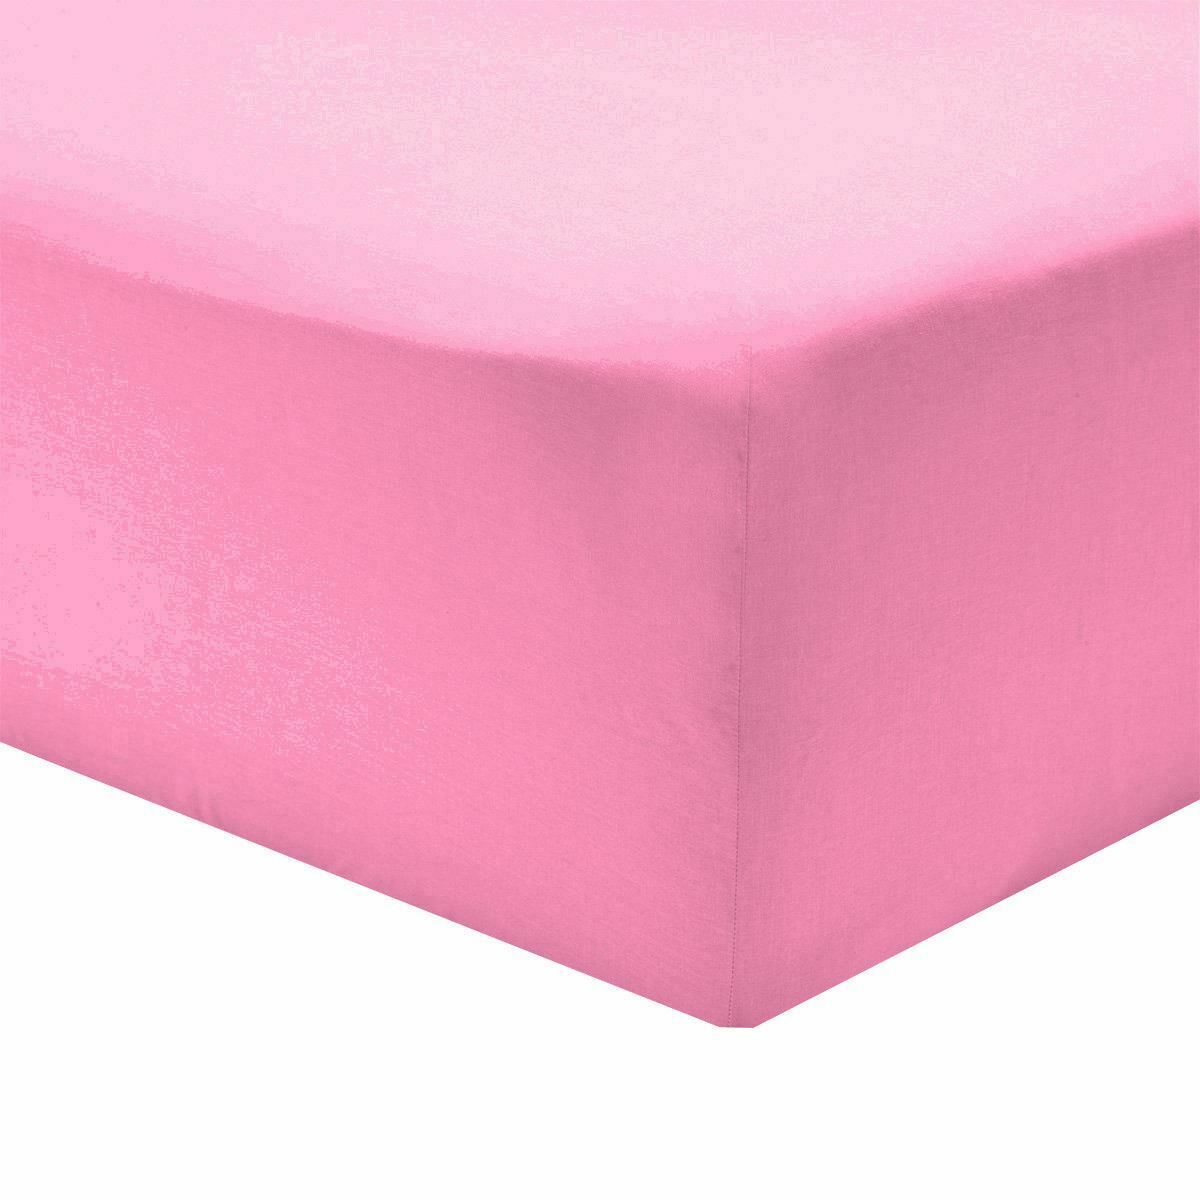 Egyptian Cotton Fitted Bed Sheet 16" Deep Or Pillowcase - TheComfortshop.co.ukBed Sheets0721718961062thecomfortshopTheComfortshop.co.ukPink 16In T200 Fitted Single NZPinkFitted Sheet Single OnlyEgyptian Cotton Fitted Bed Sheet 16" Deep Or Pillowcase - TheComfortshop.co.uk